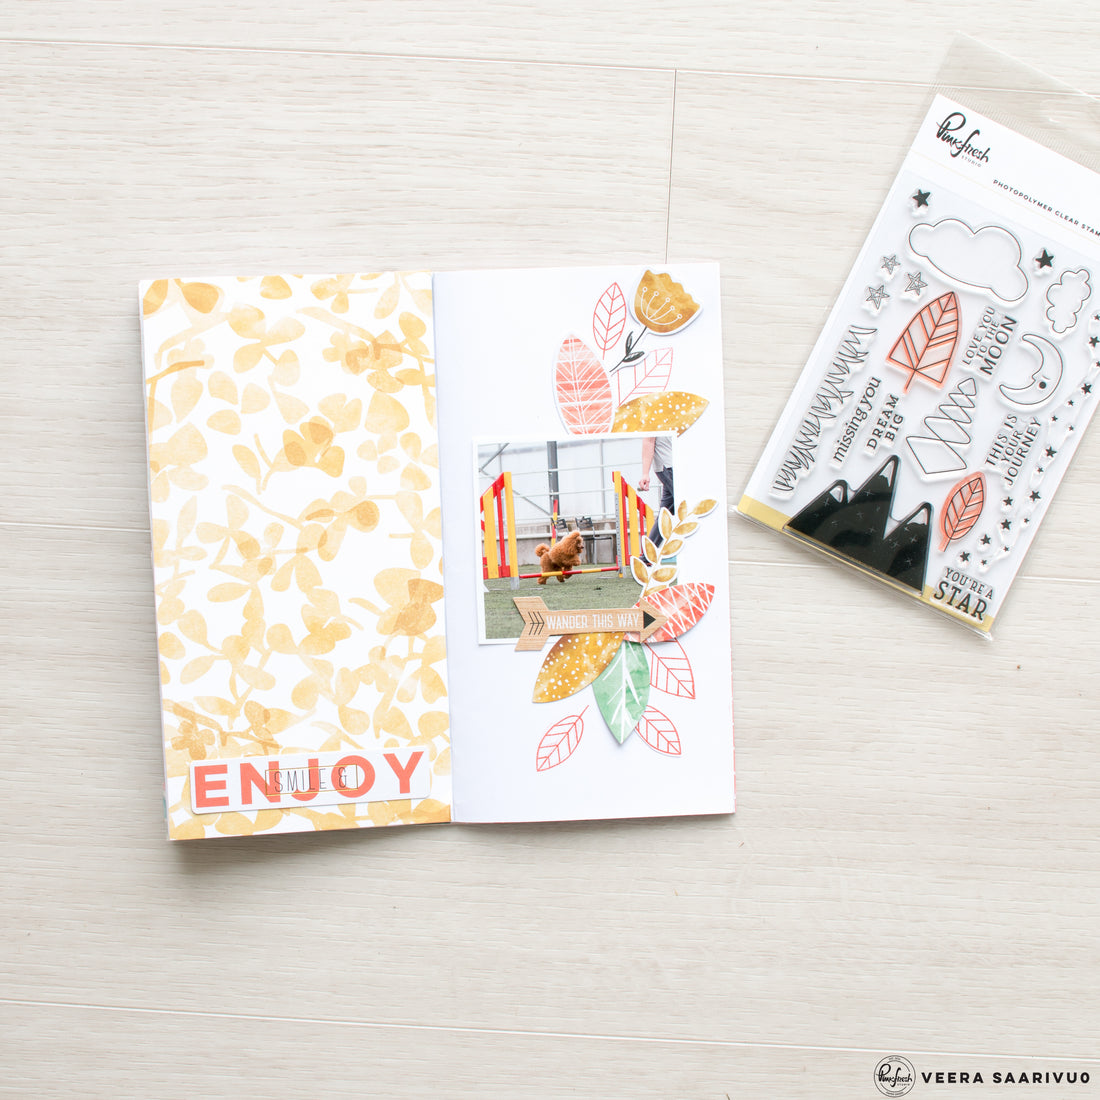 Stamping in Traveler's Notebook with Veera